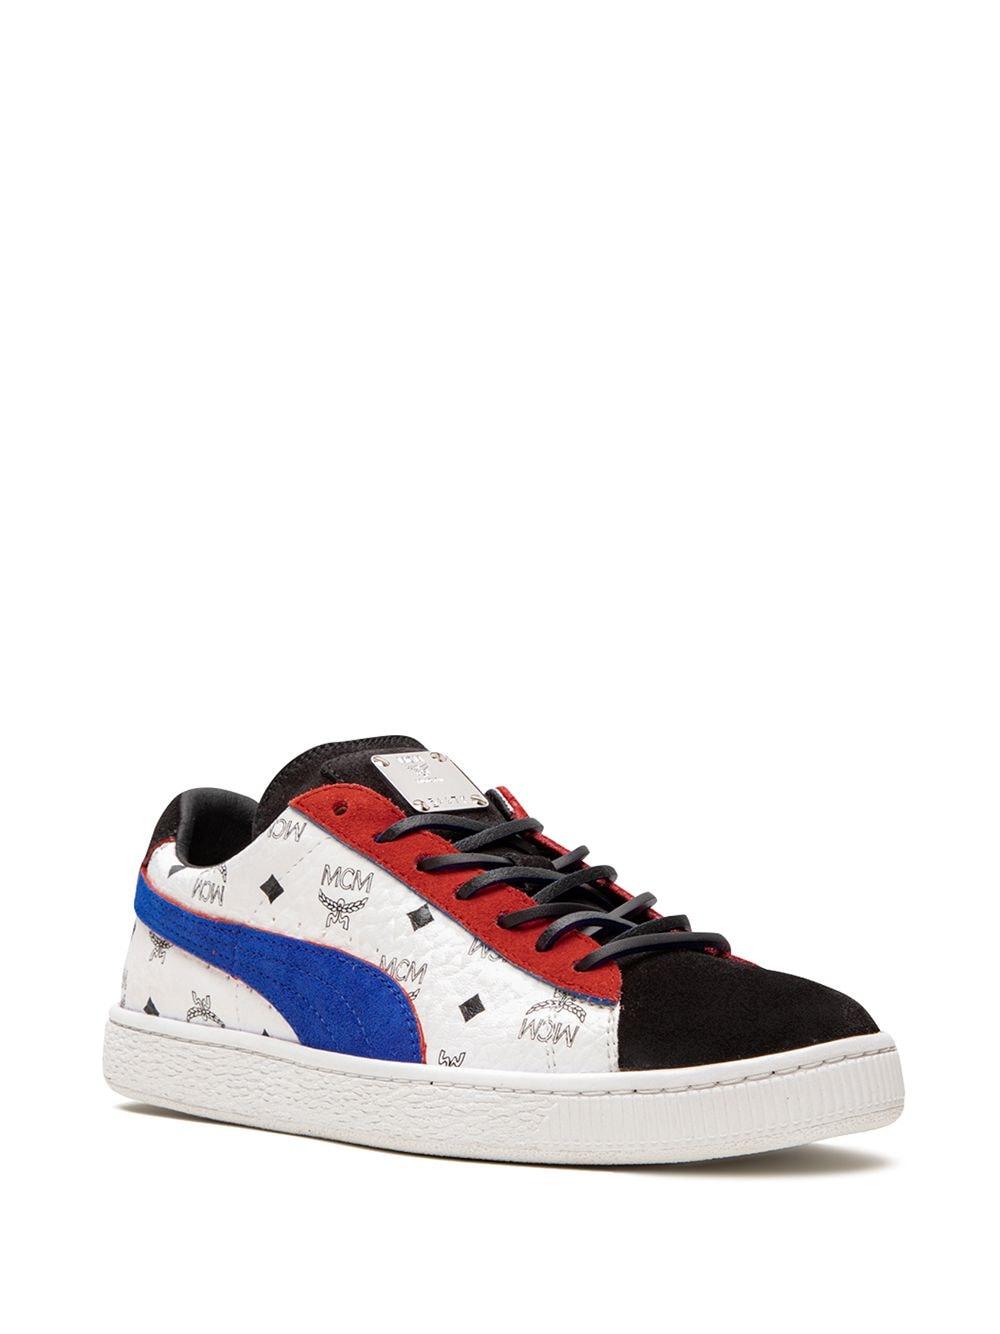 Buy > mcm shoes puma > in stock